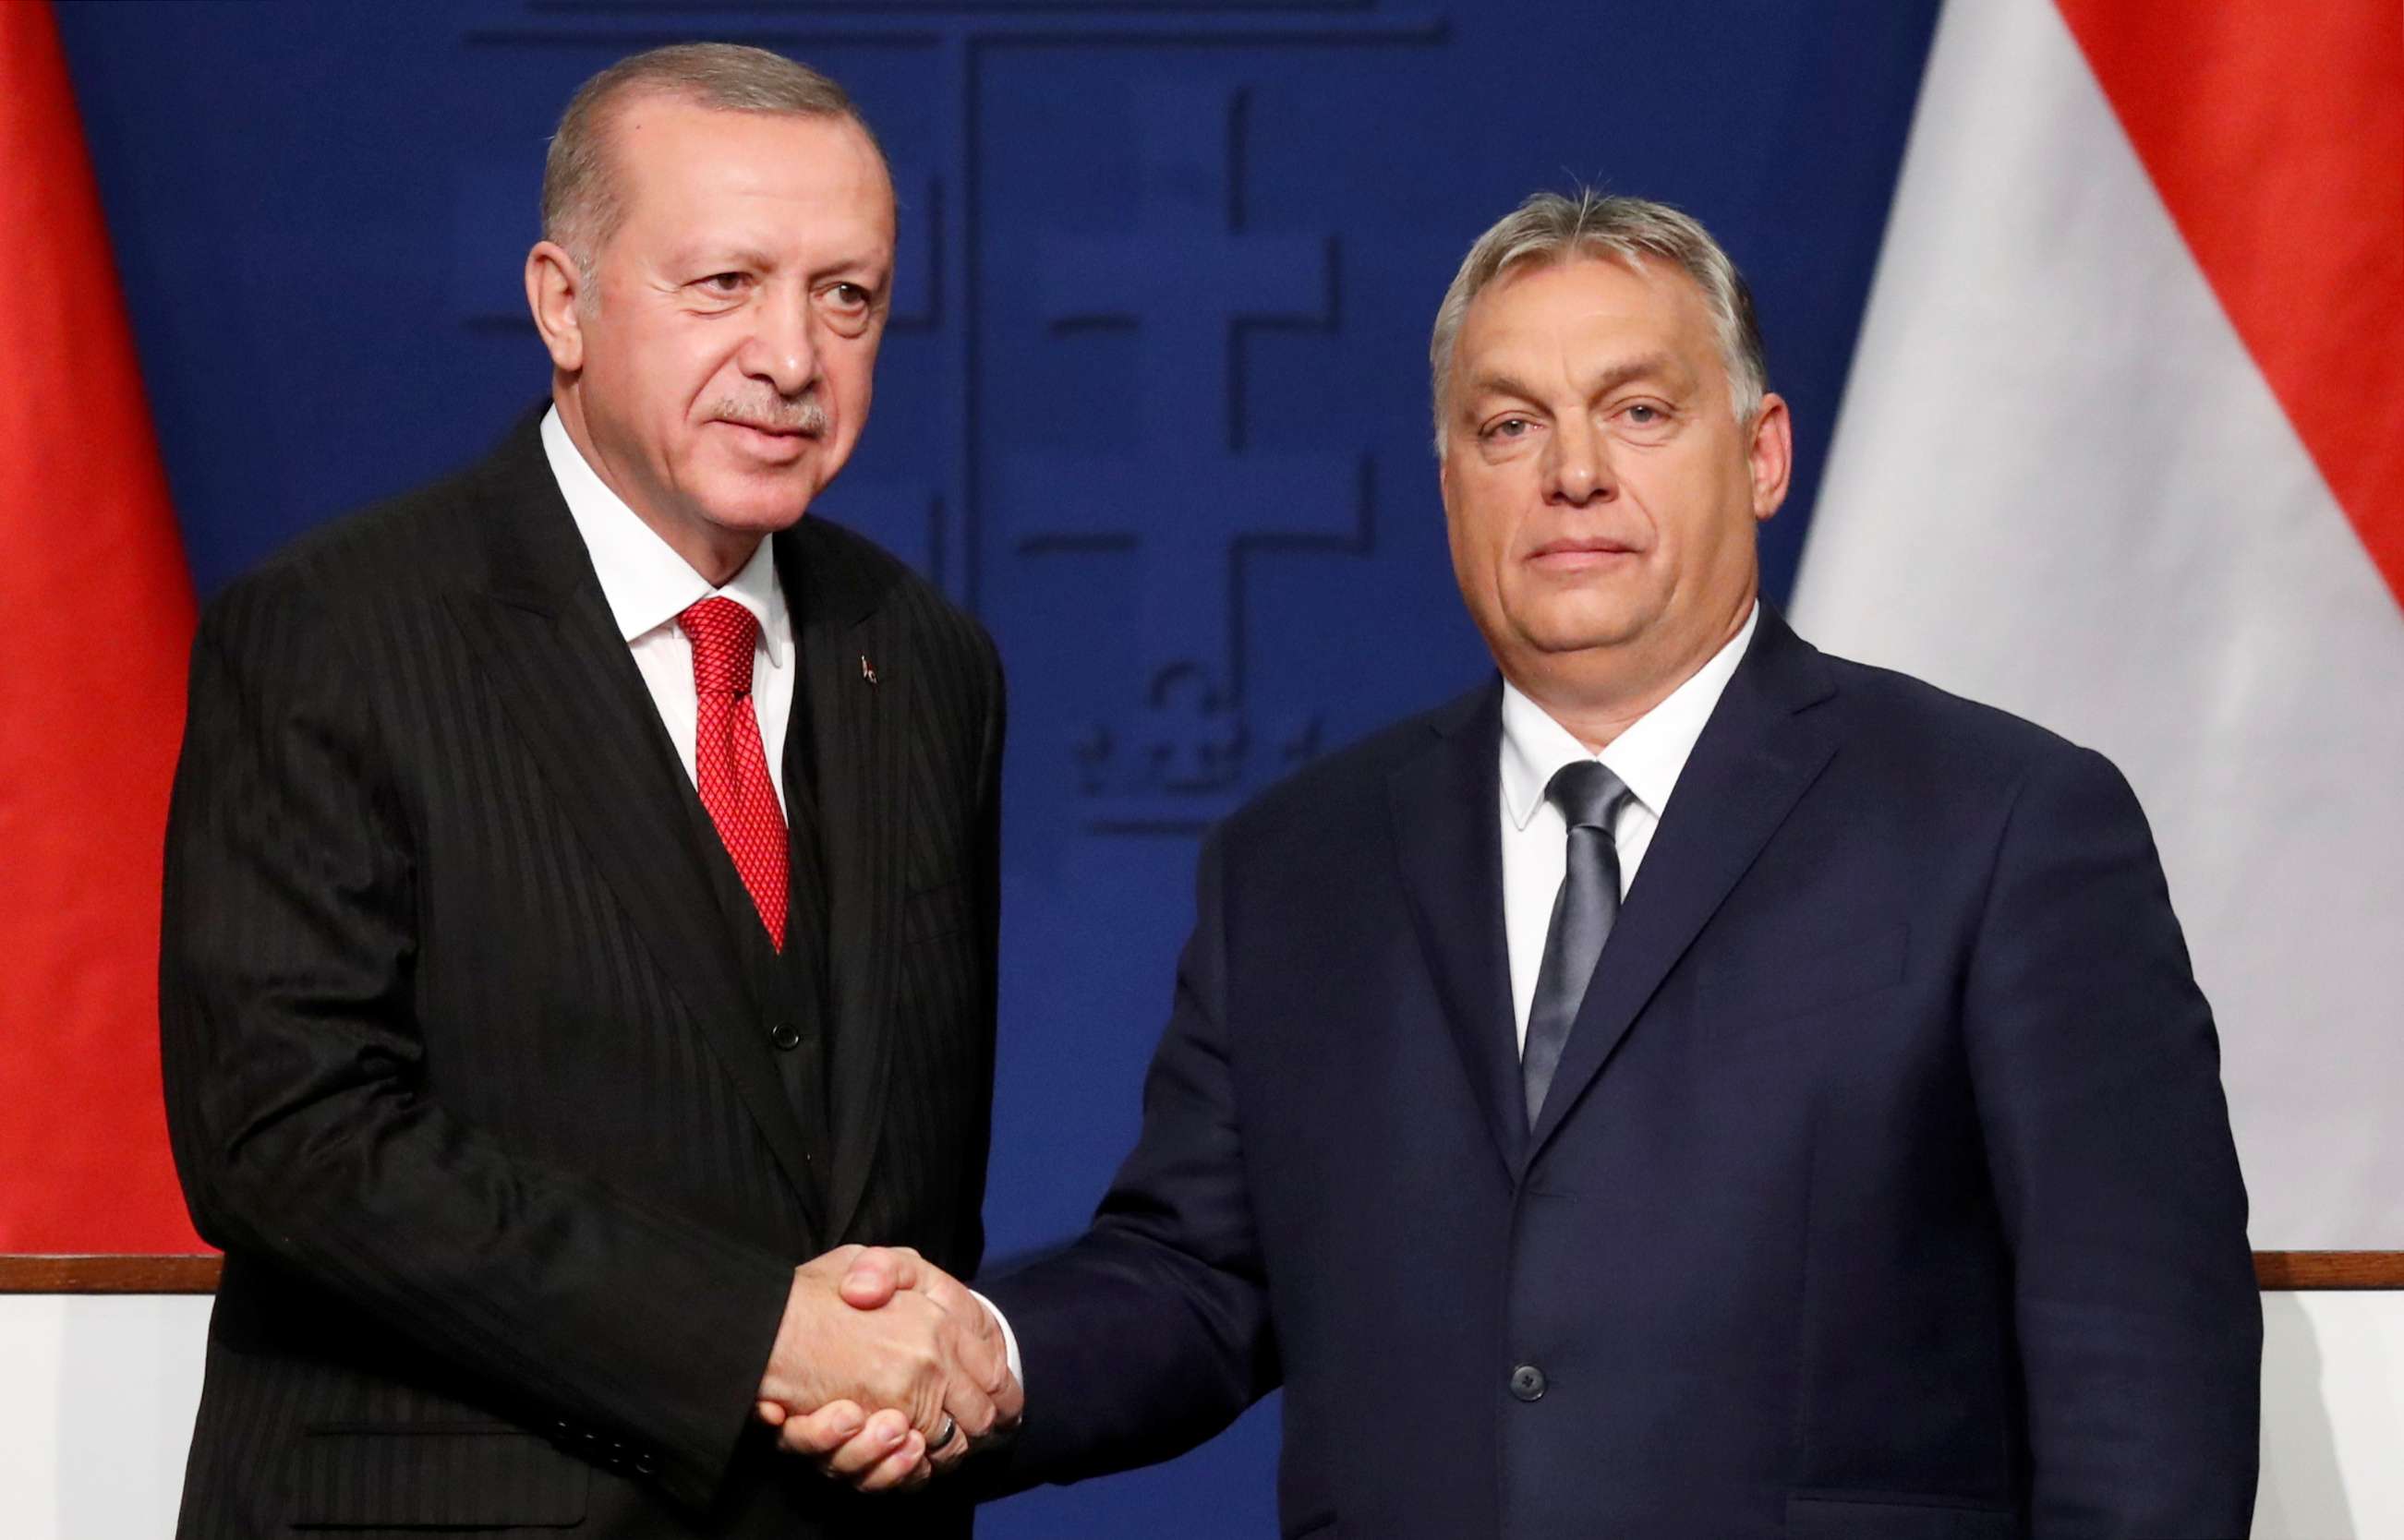 Turkish President Recep Tayyip Erdogan and Hungarian Prime Minister Viktor Orban shake hands during a news conference in Budapest